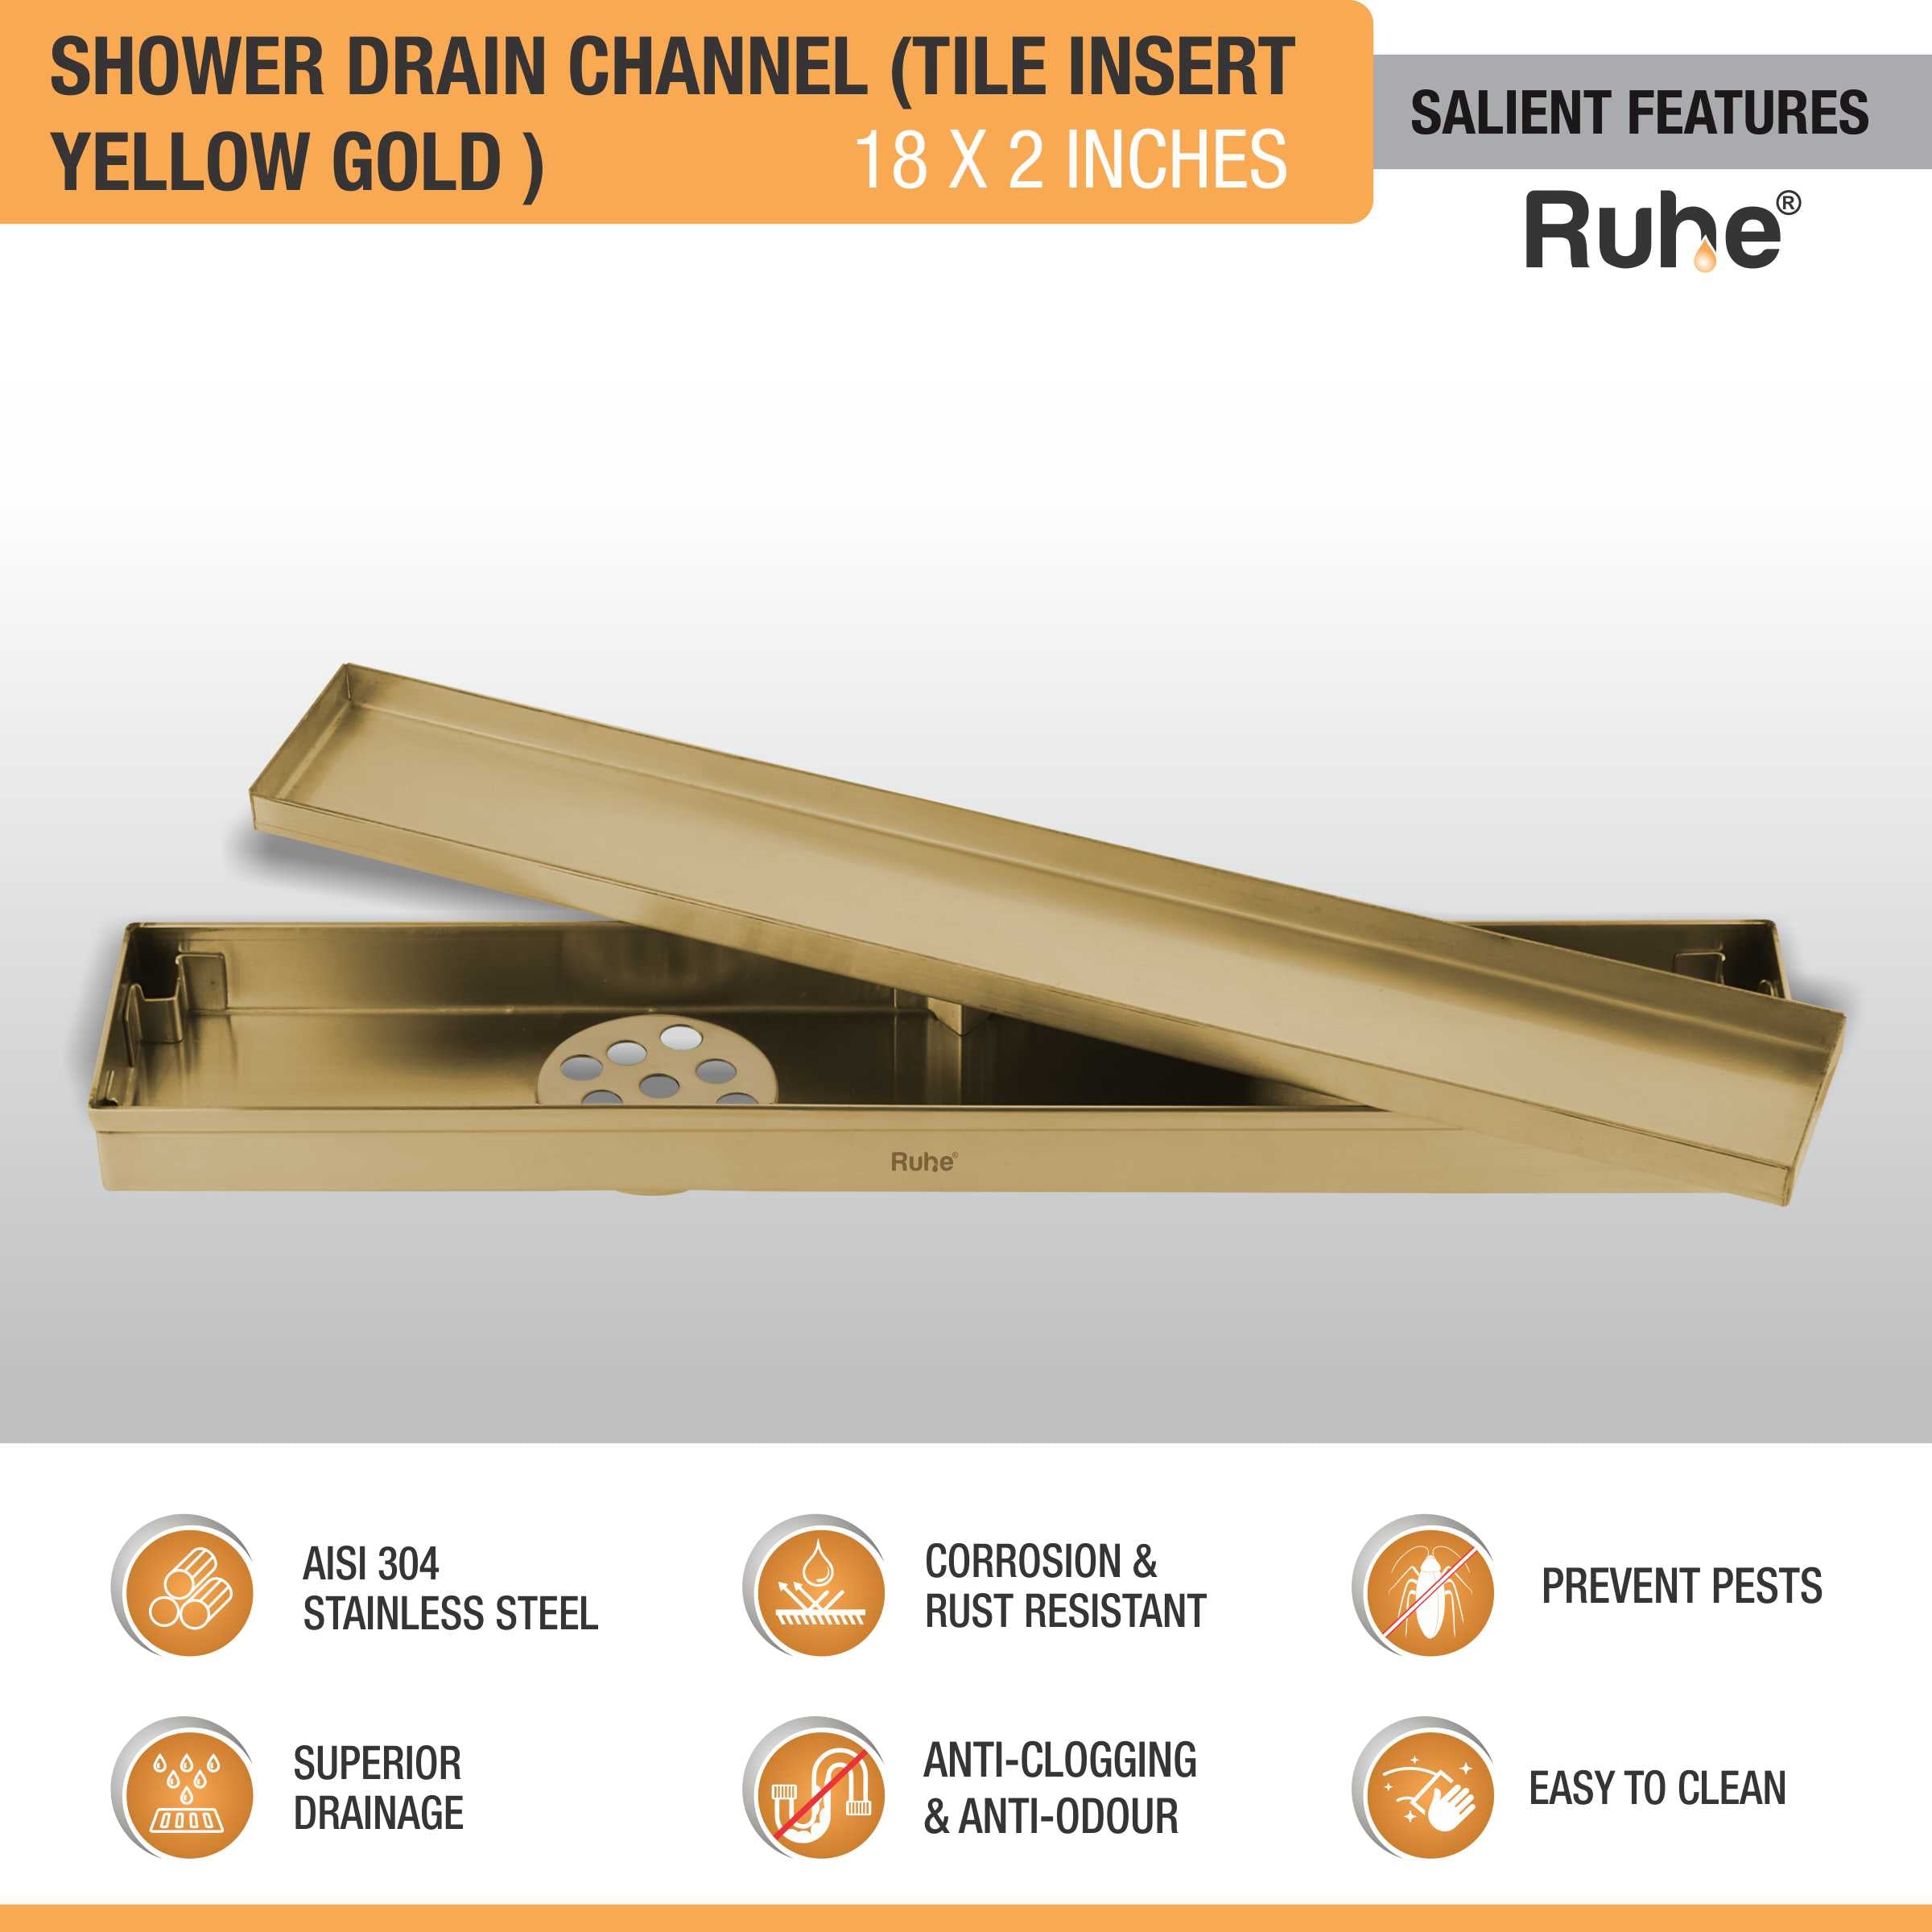 Tile Insert Shower Drain Channel (18 x 2 Inches) YELLOW GOLD features